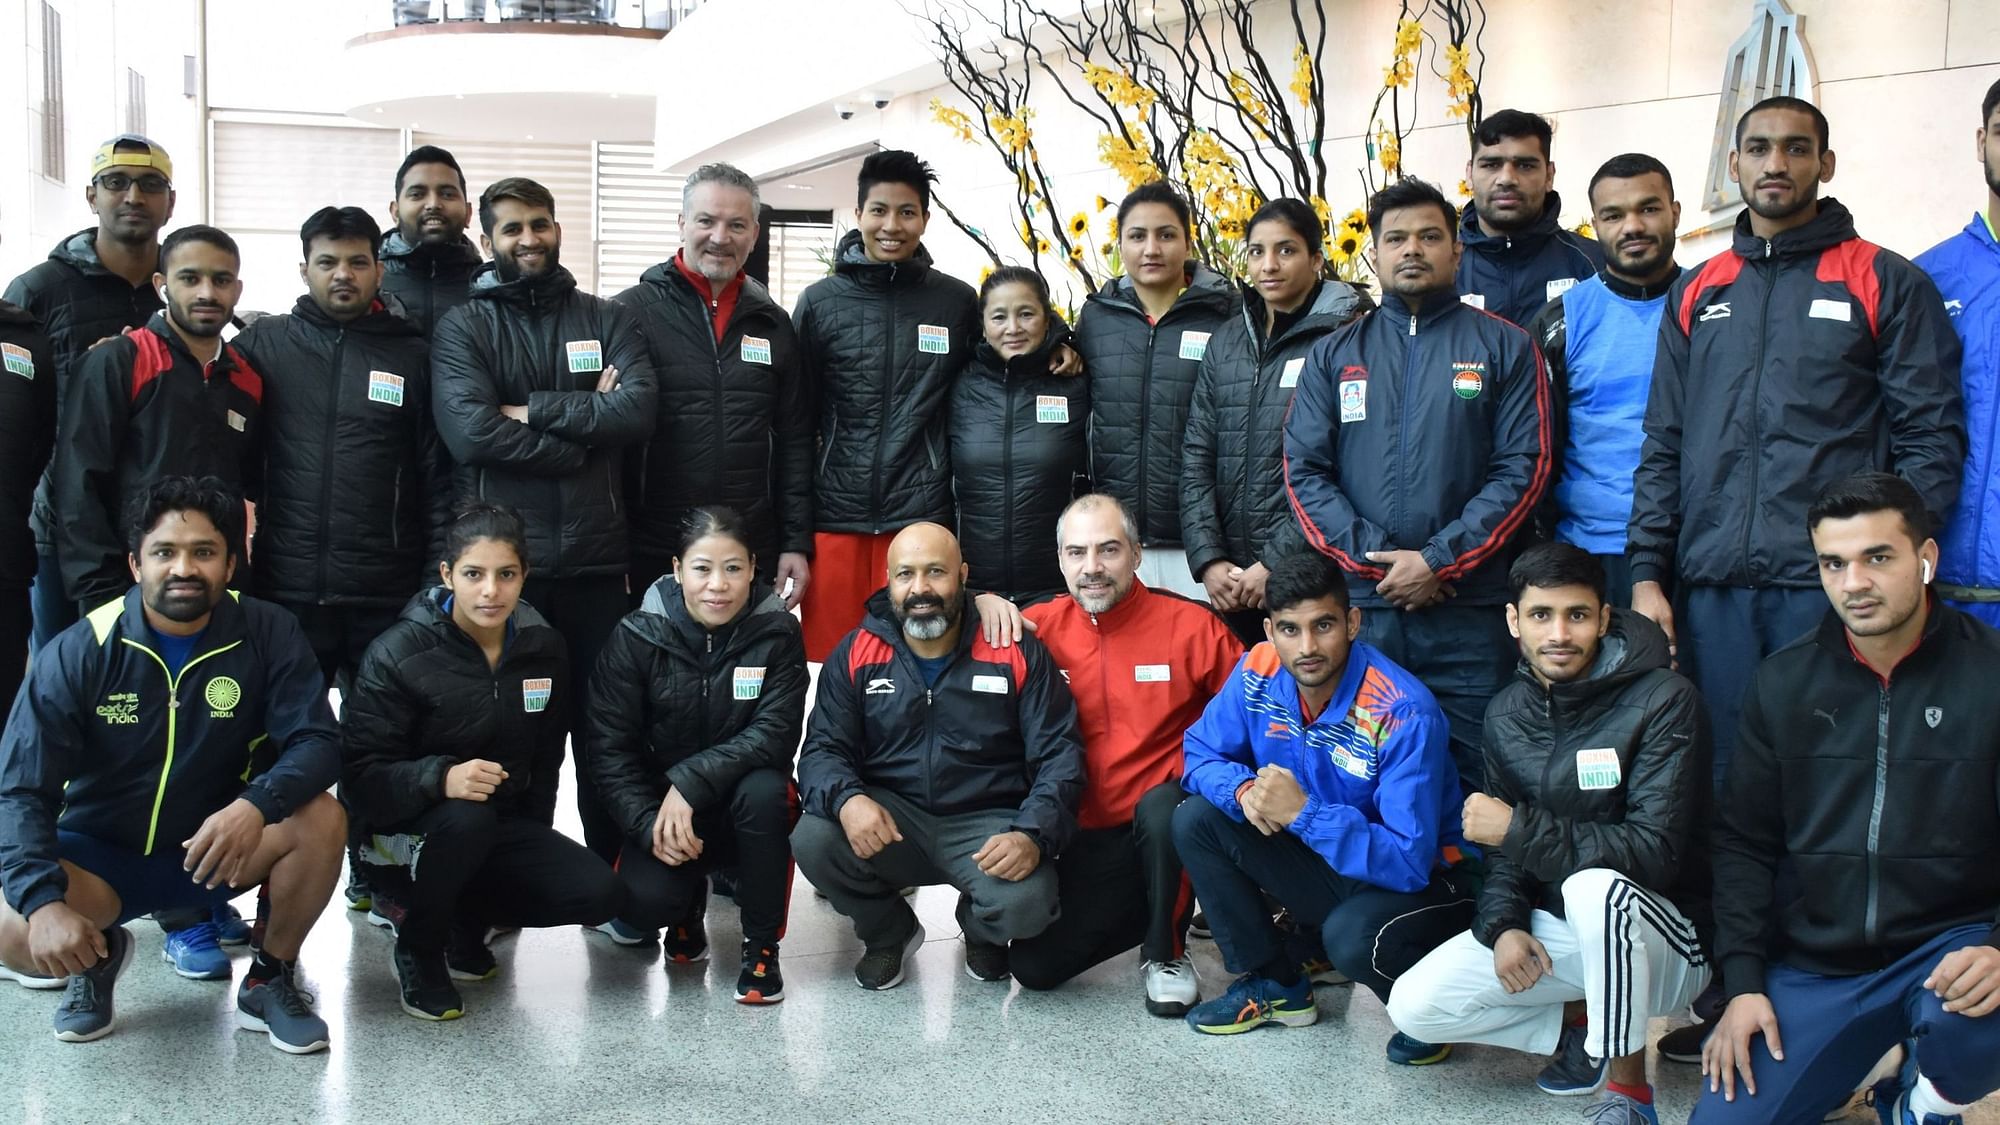 13 Indian boxers will be vying for an Olympics berth this coming week in Jordan.